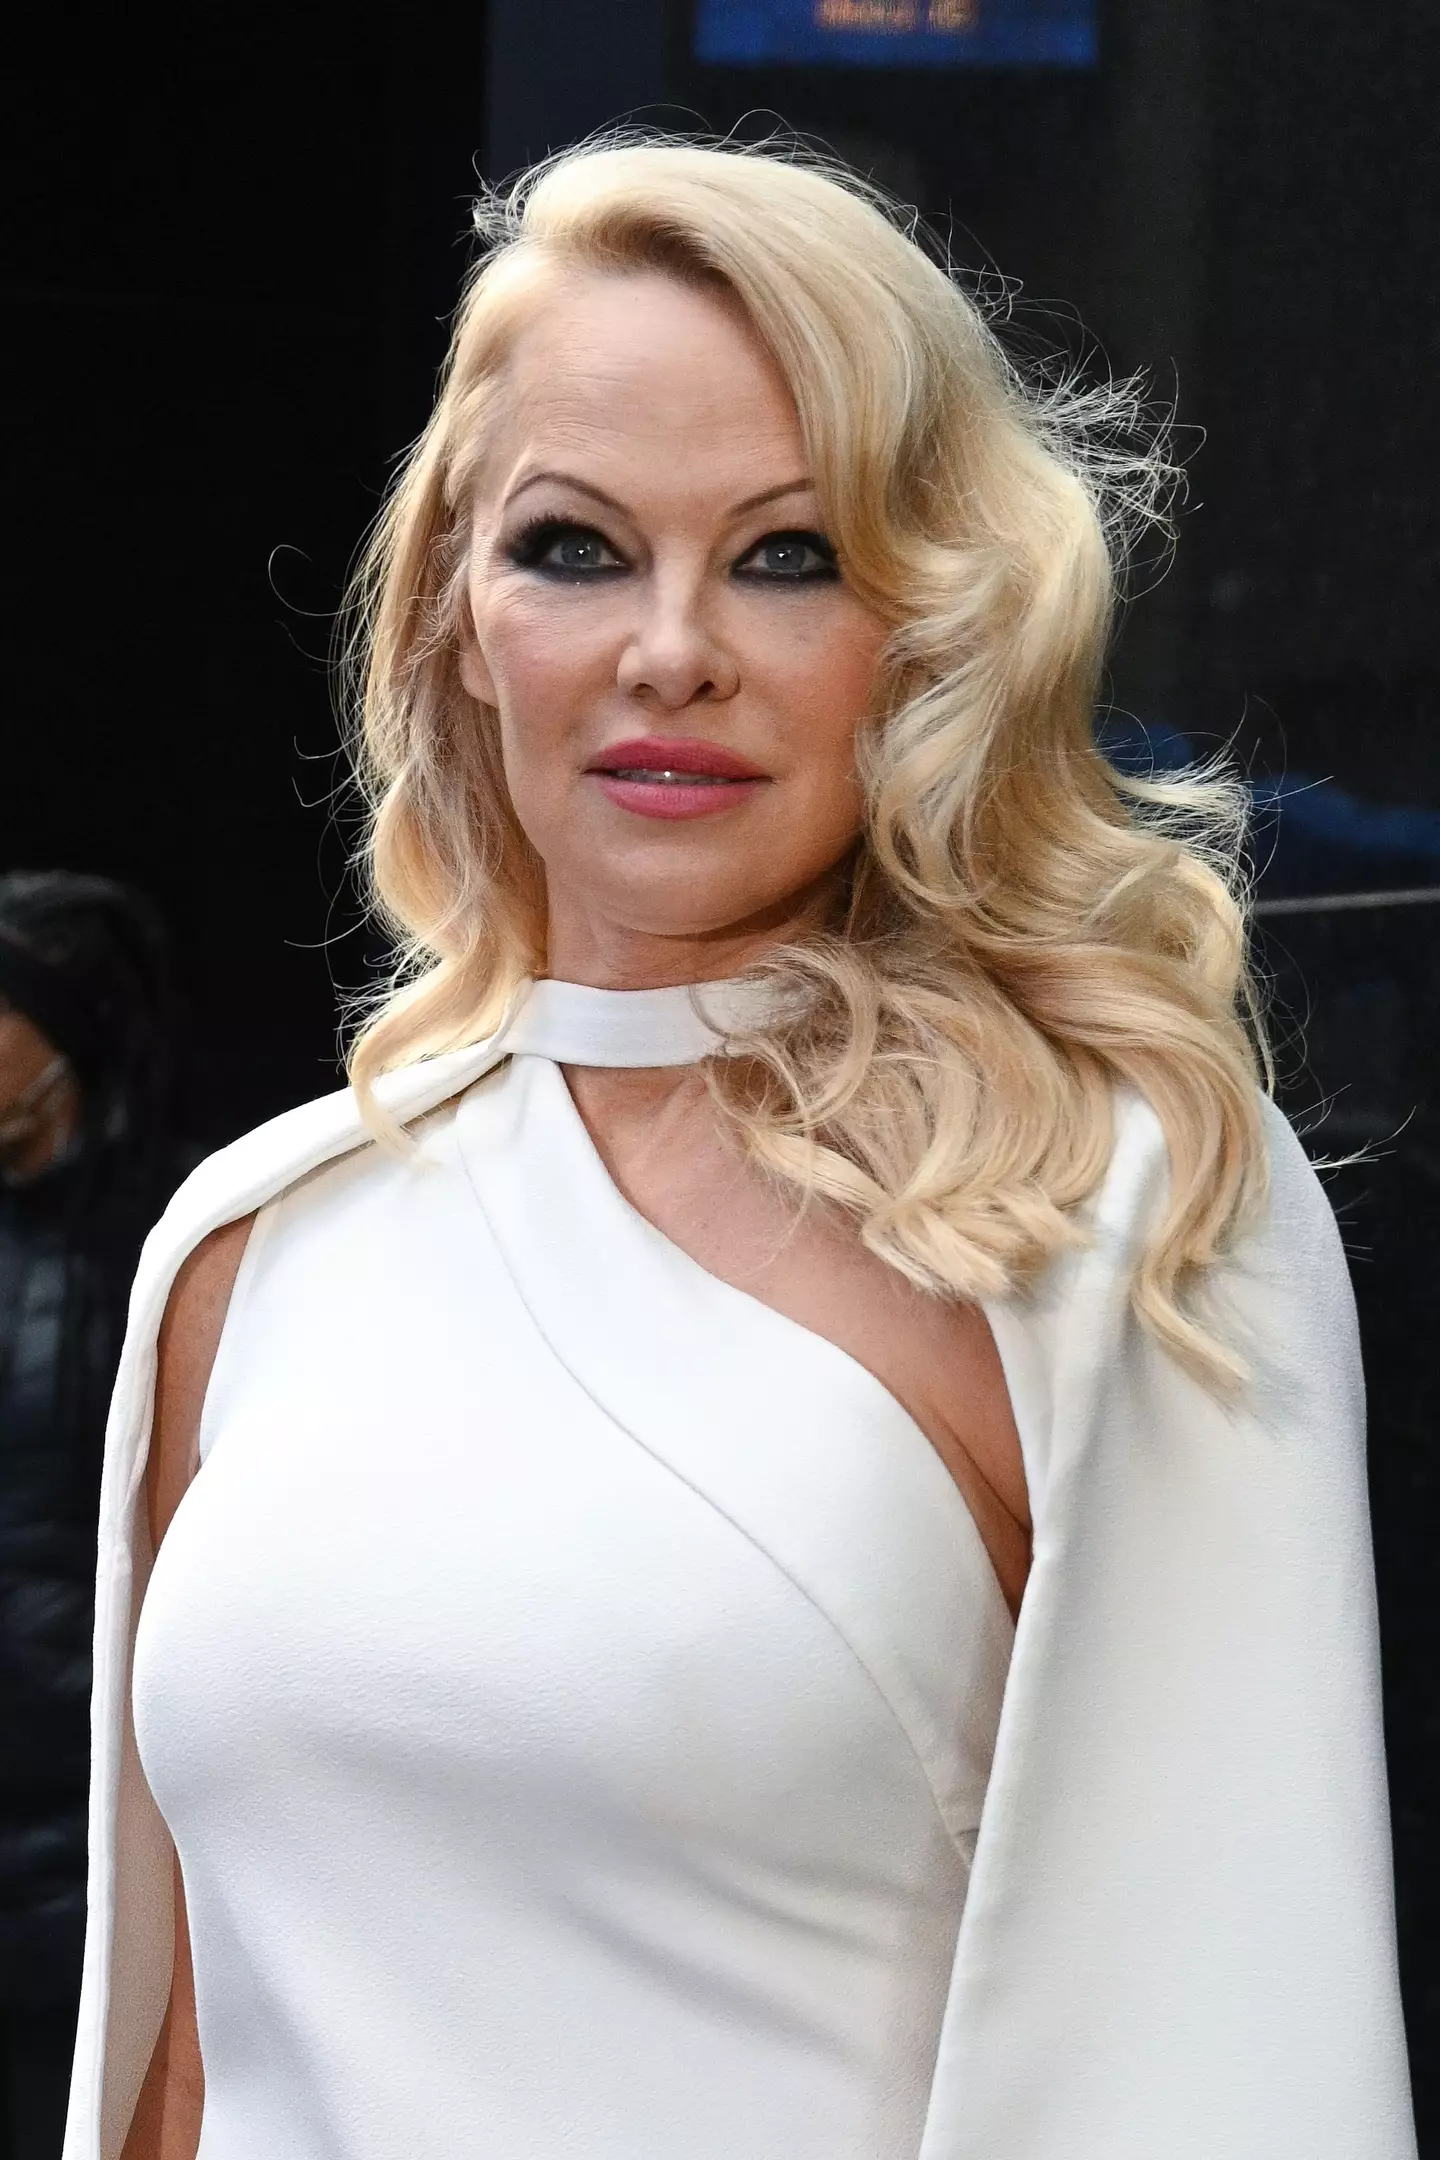 Pamela Anderson says Hugh Hefner was the only man to treat her with respect.